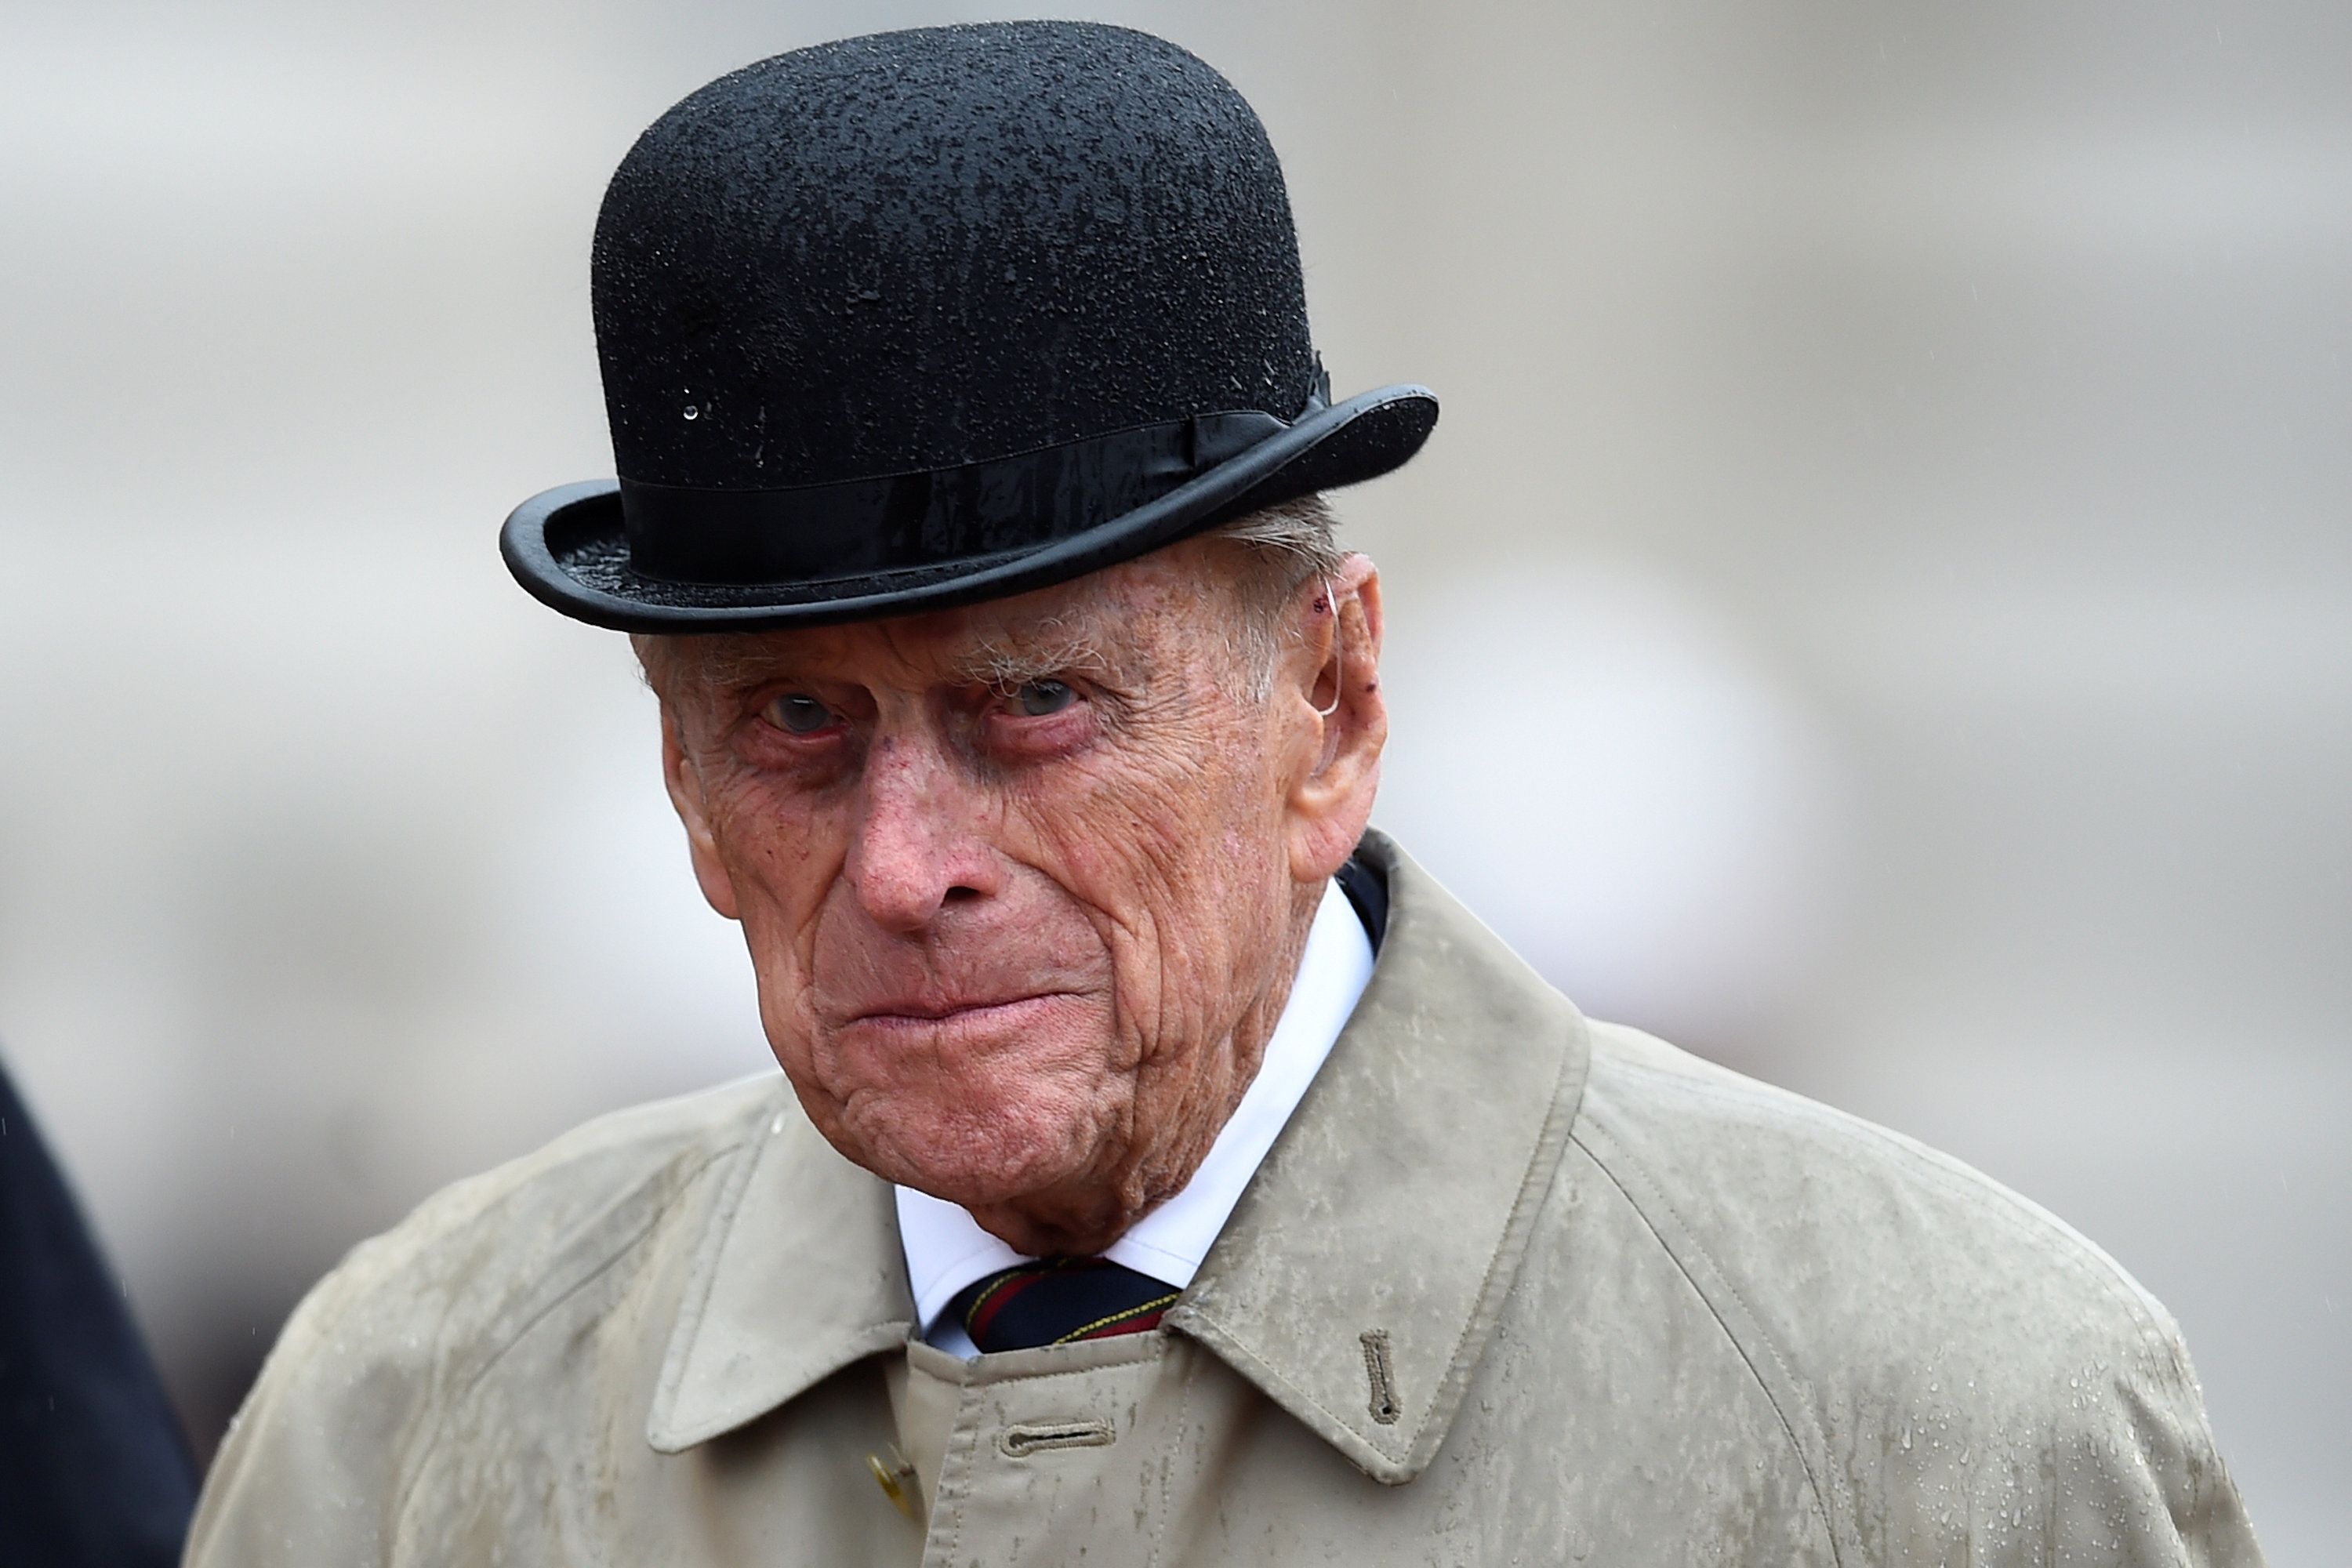 prince Philip, Duke of Edinburgh as Captain General, Royal Marines, making his final individual public engagement while attending a parade to mark the finale of the 1664 Global Challenge on the Buckingham Palace Forecourt in London, England | Source: Getty Images